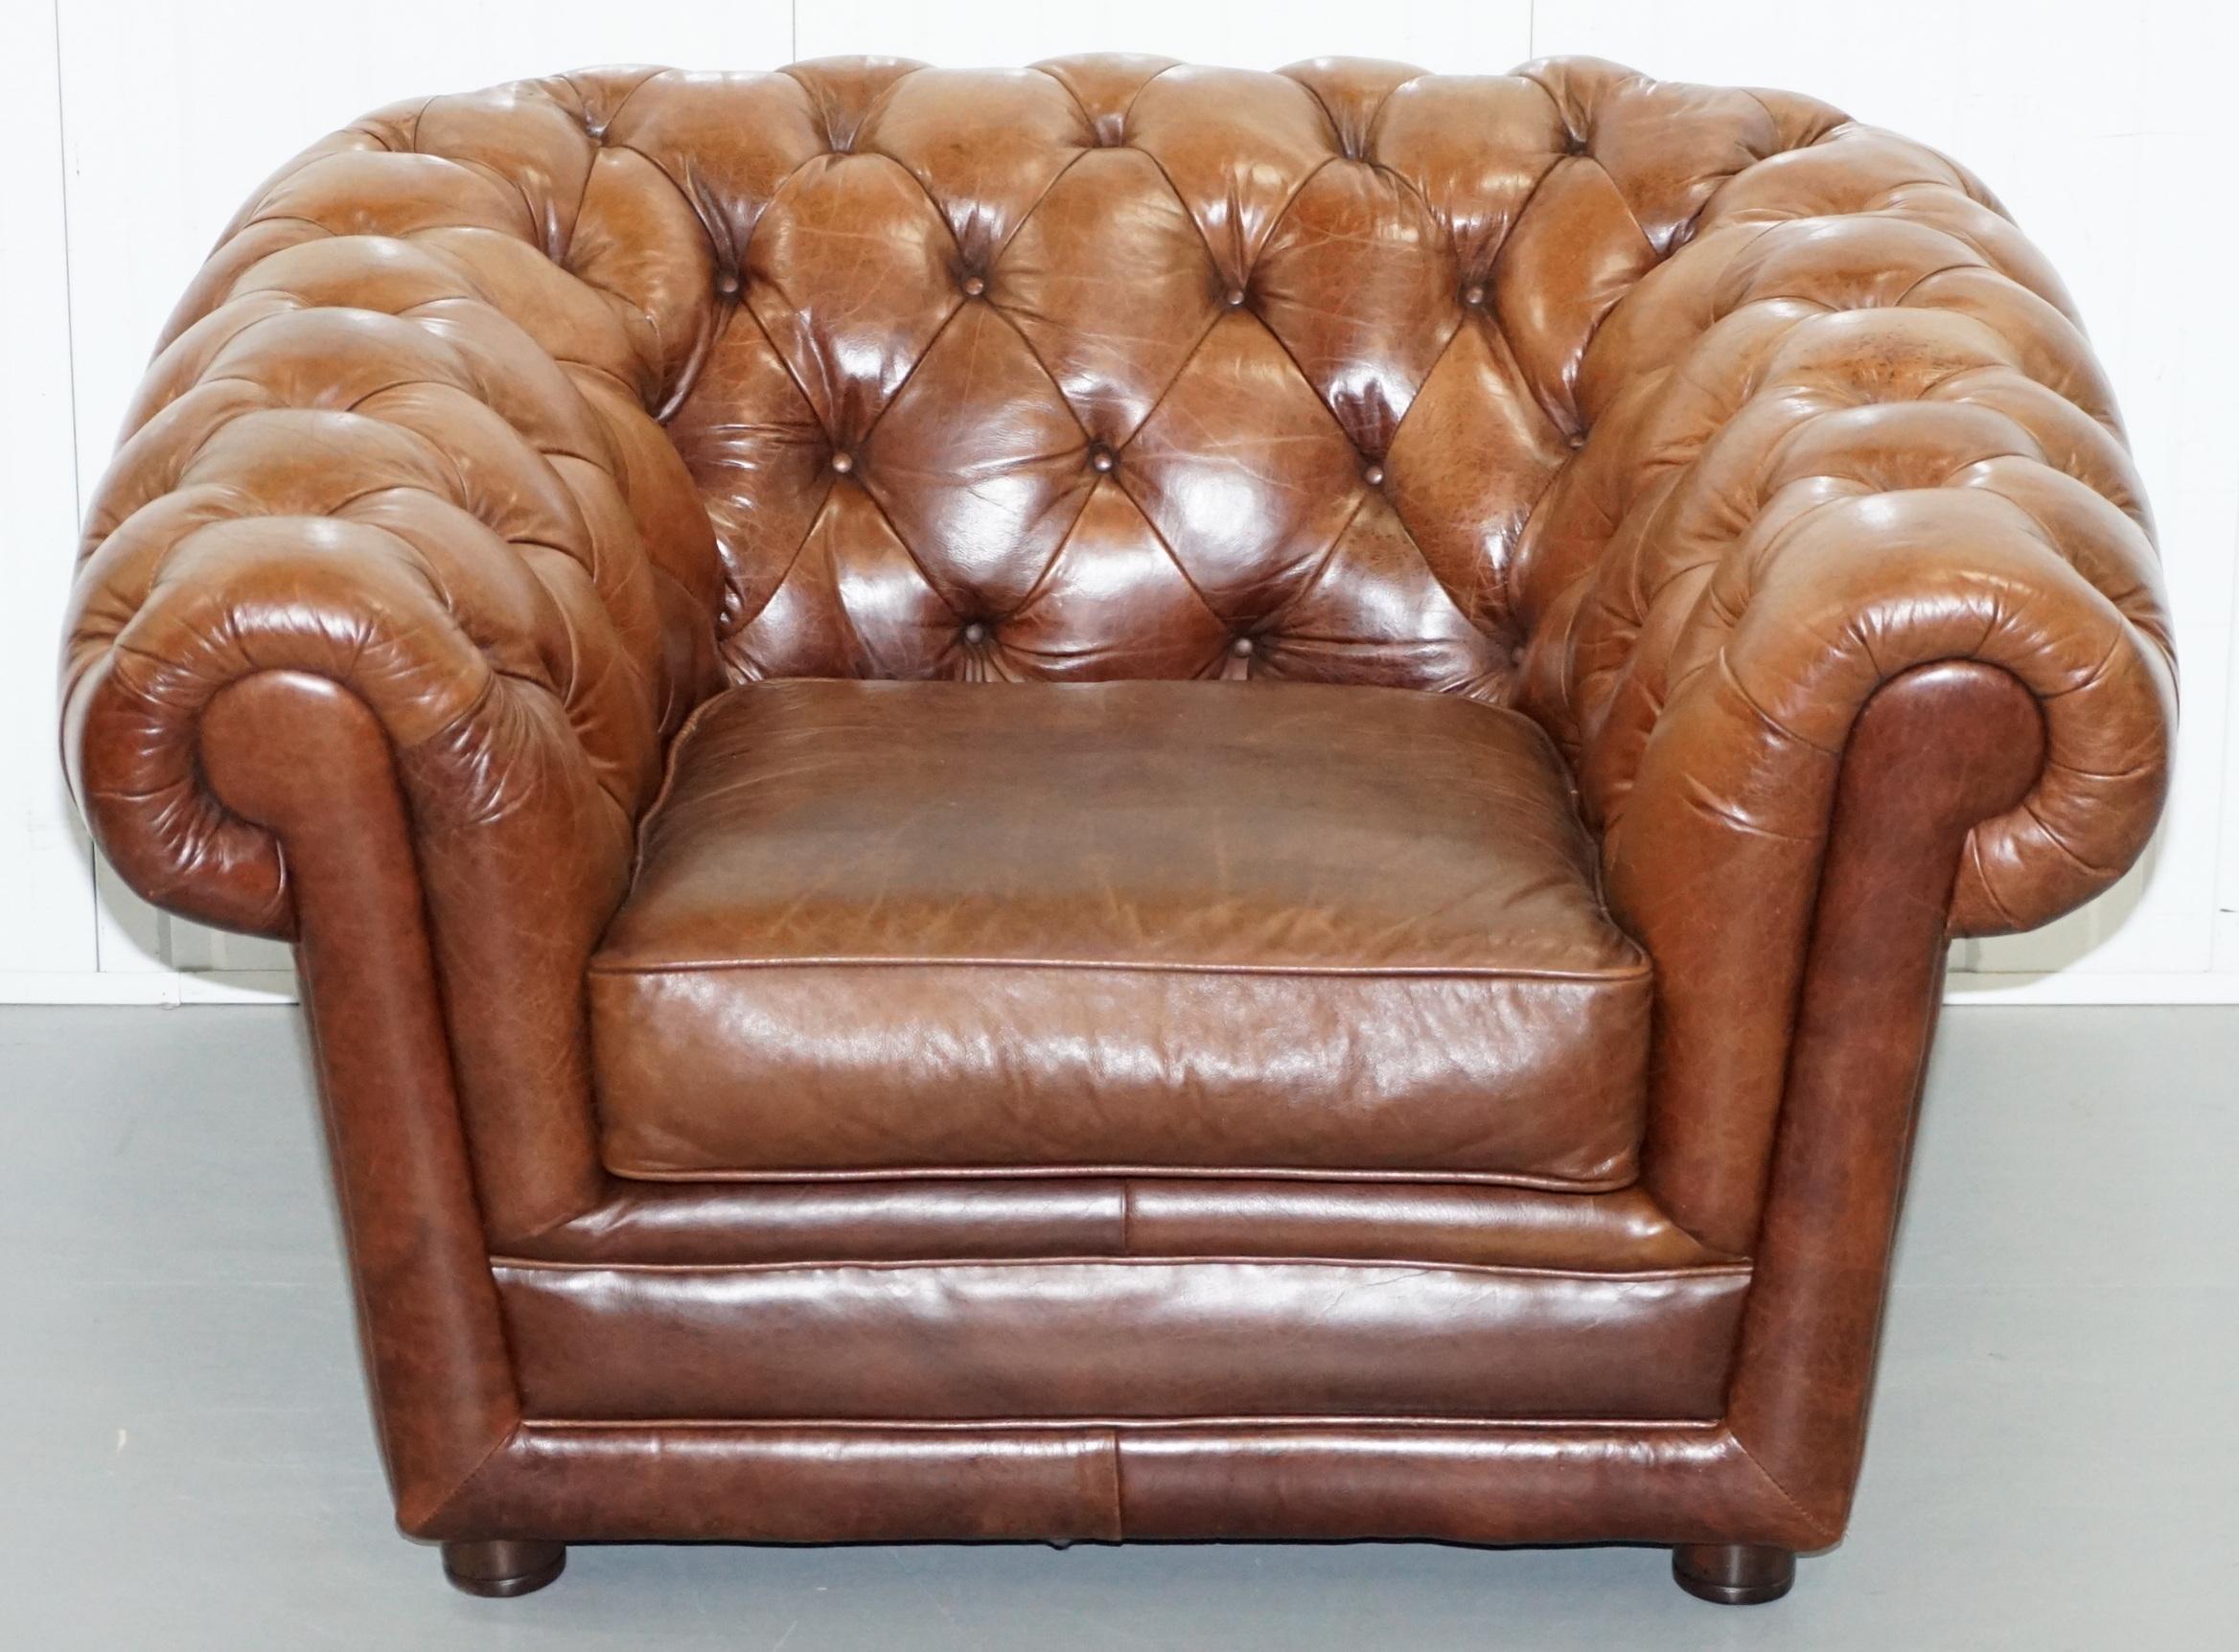 We are delighted to offer for sale this stunning aged brown heritage leather sloped arm Chesterfield club armchair

A very good looking and well made piece, the leather is what’s called Heritage hide so it has a vintage distressed finish from new,